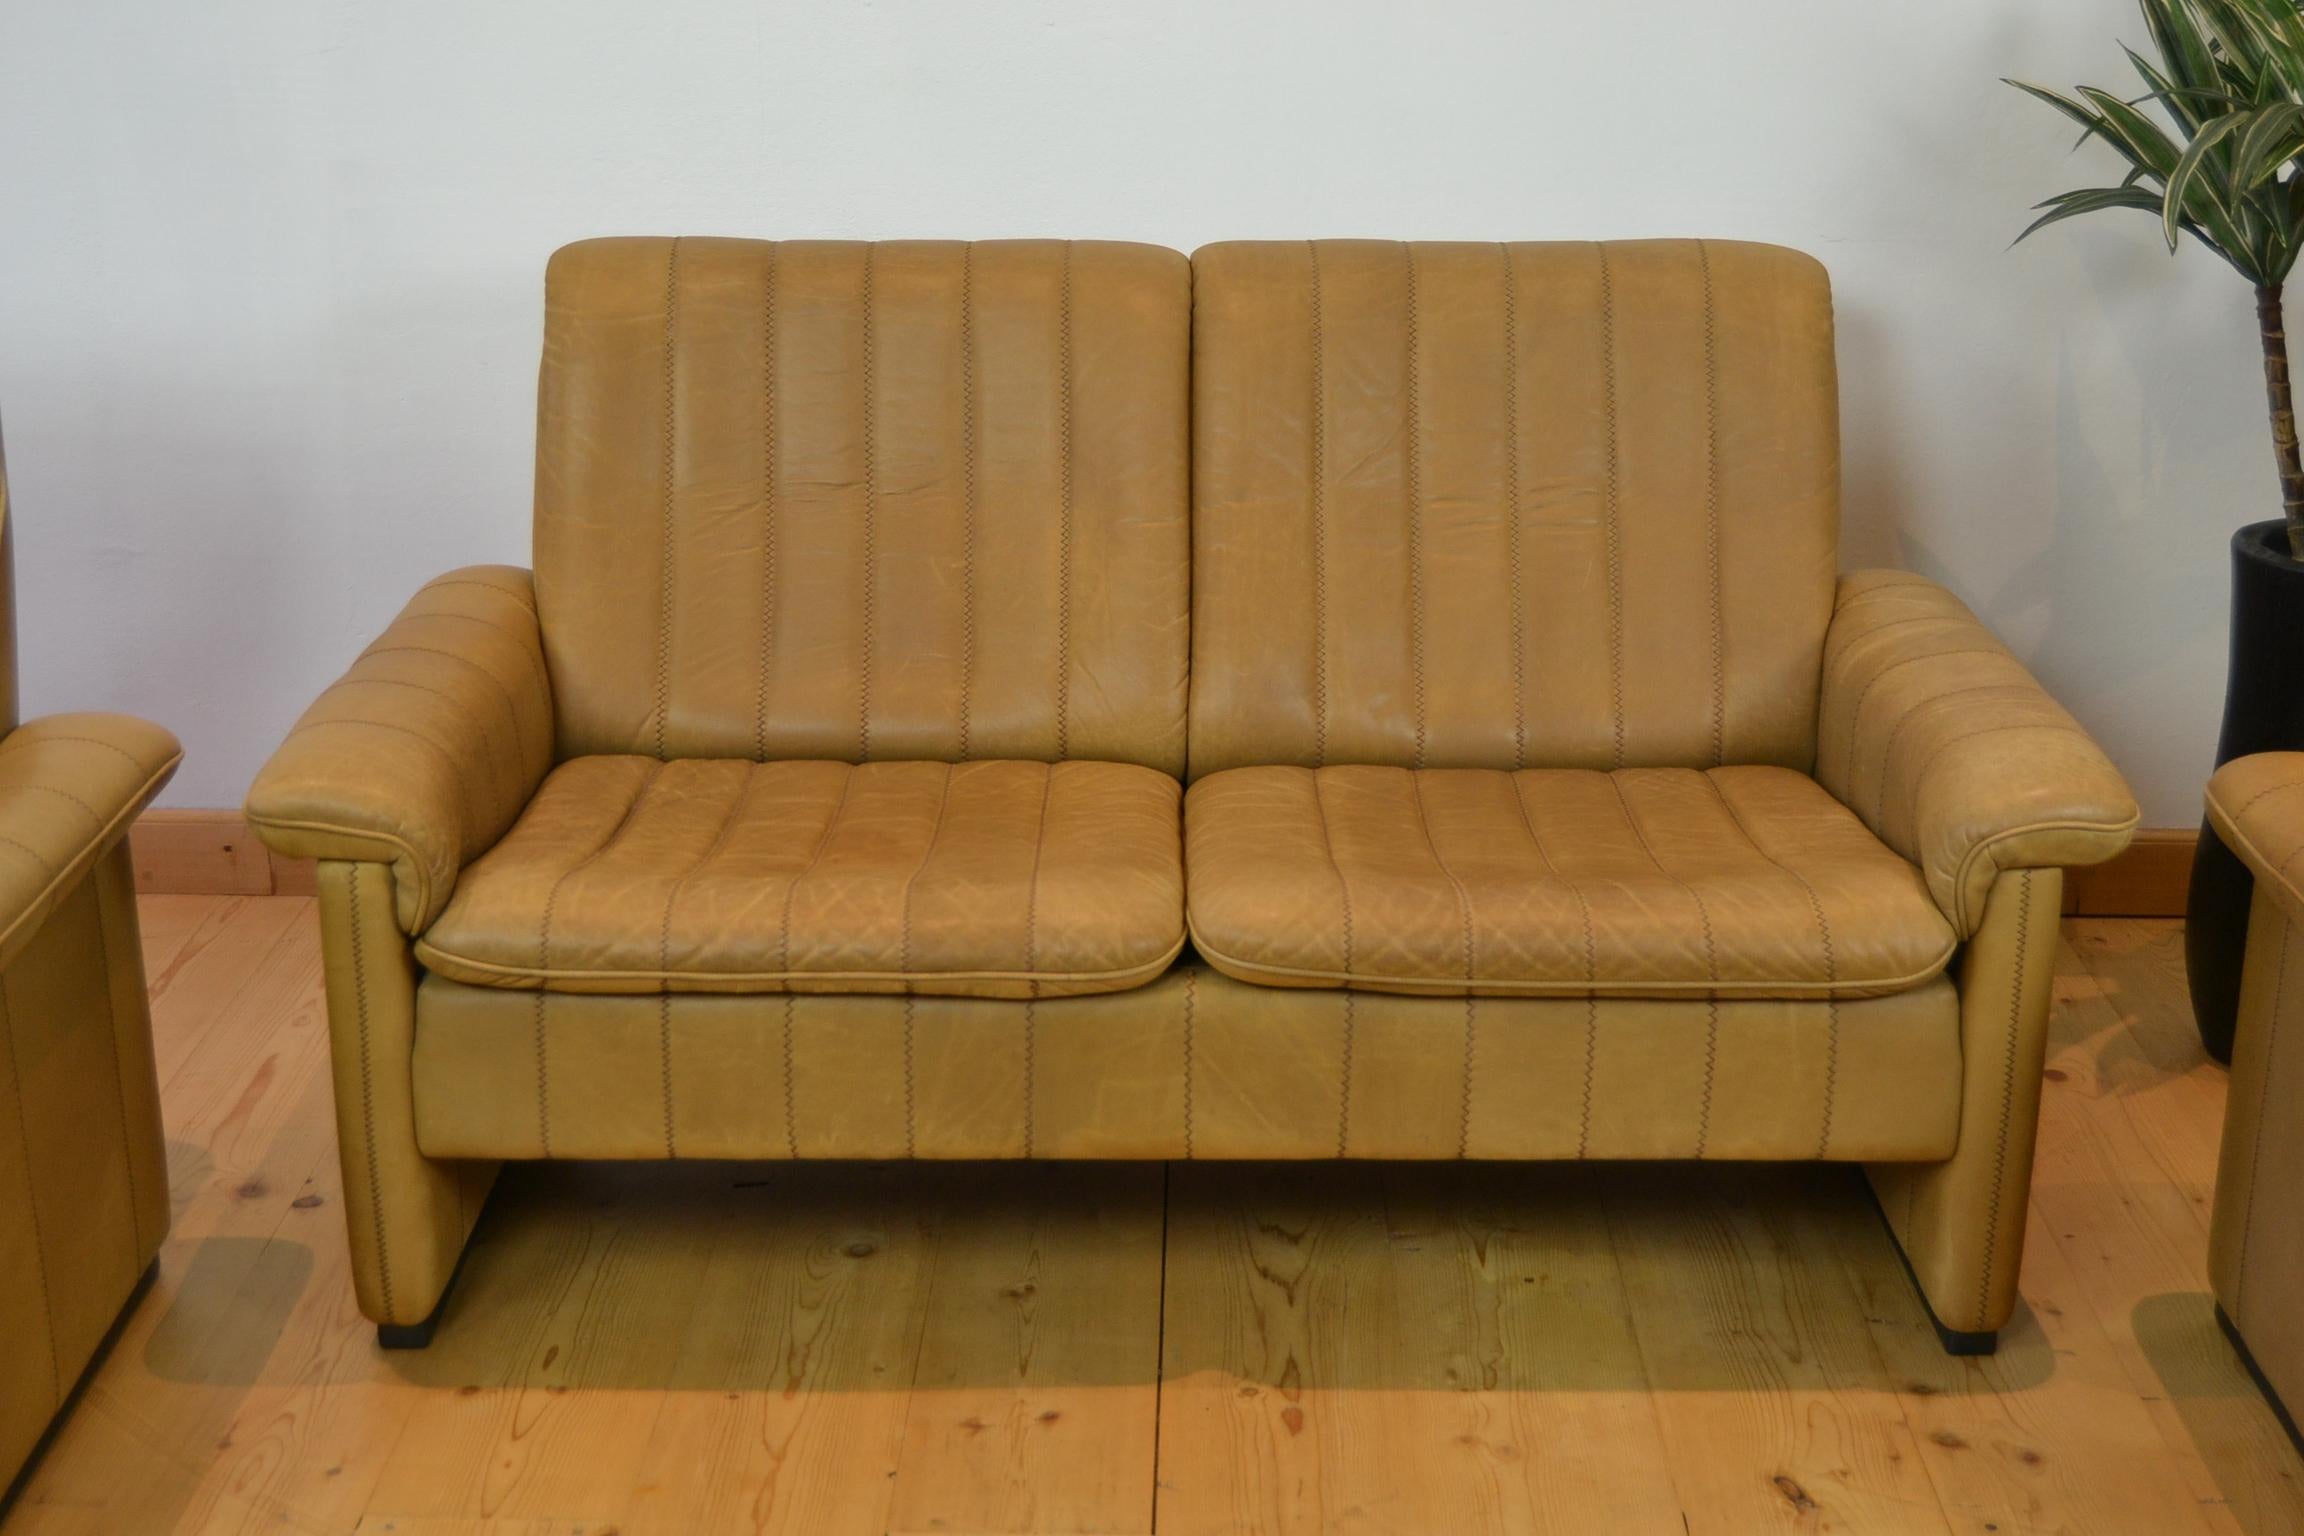 Mid-Century Modern Vintage De Sede Living Room Set, 2 Lounge Chairs and Sofa, Brown Leather